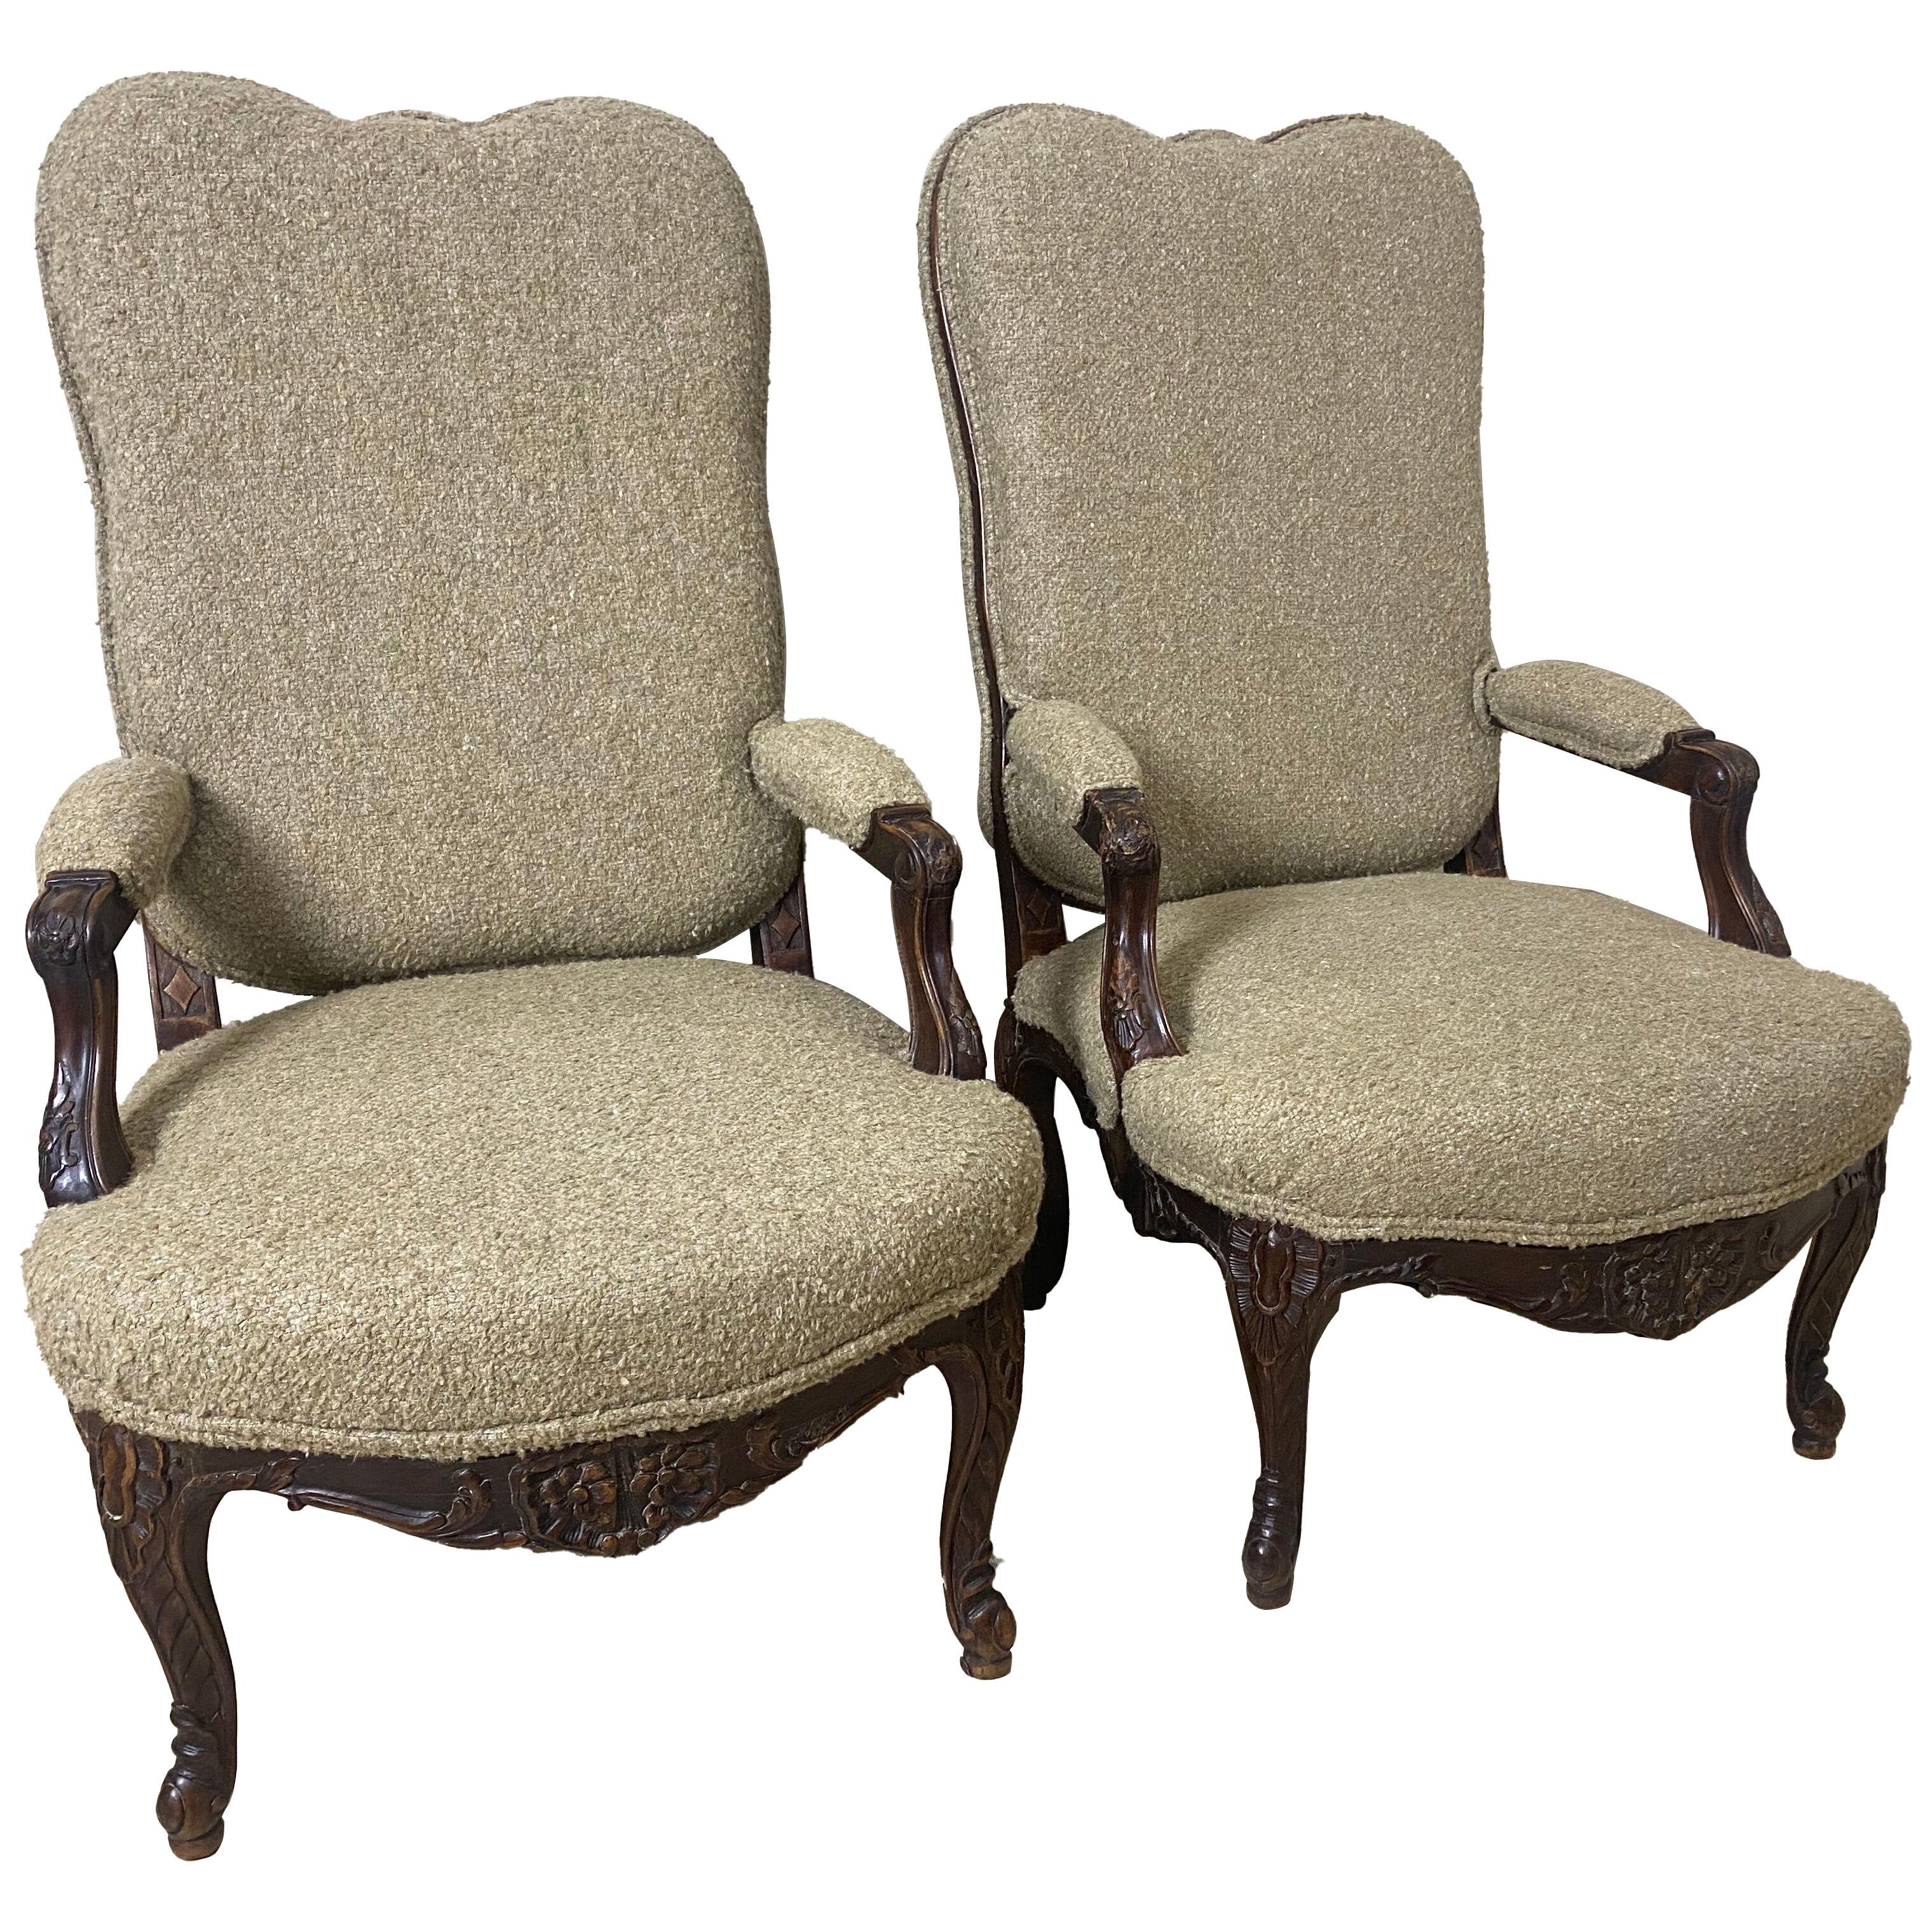 Pair of Classical, Antique Armchairs from Spain